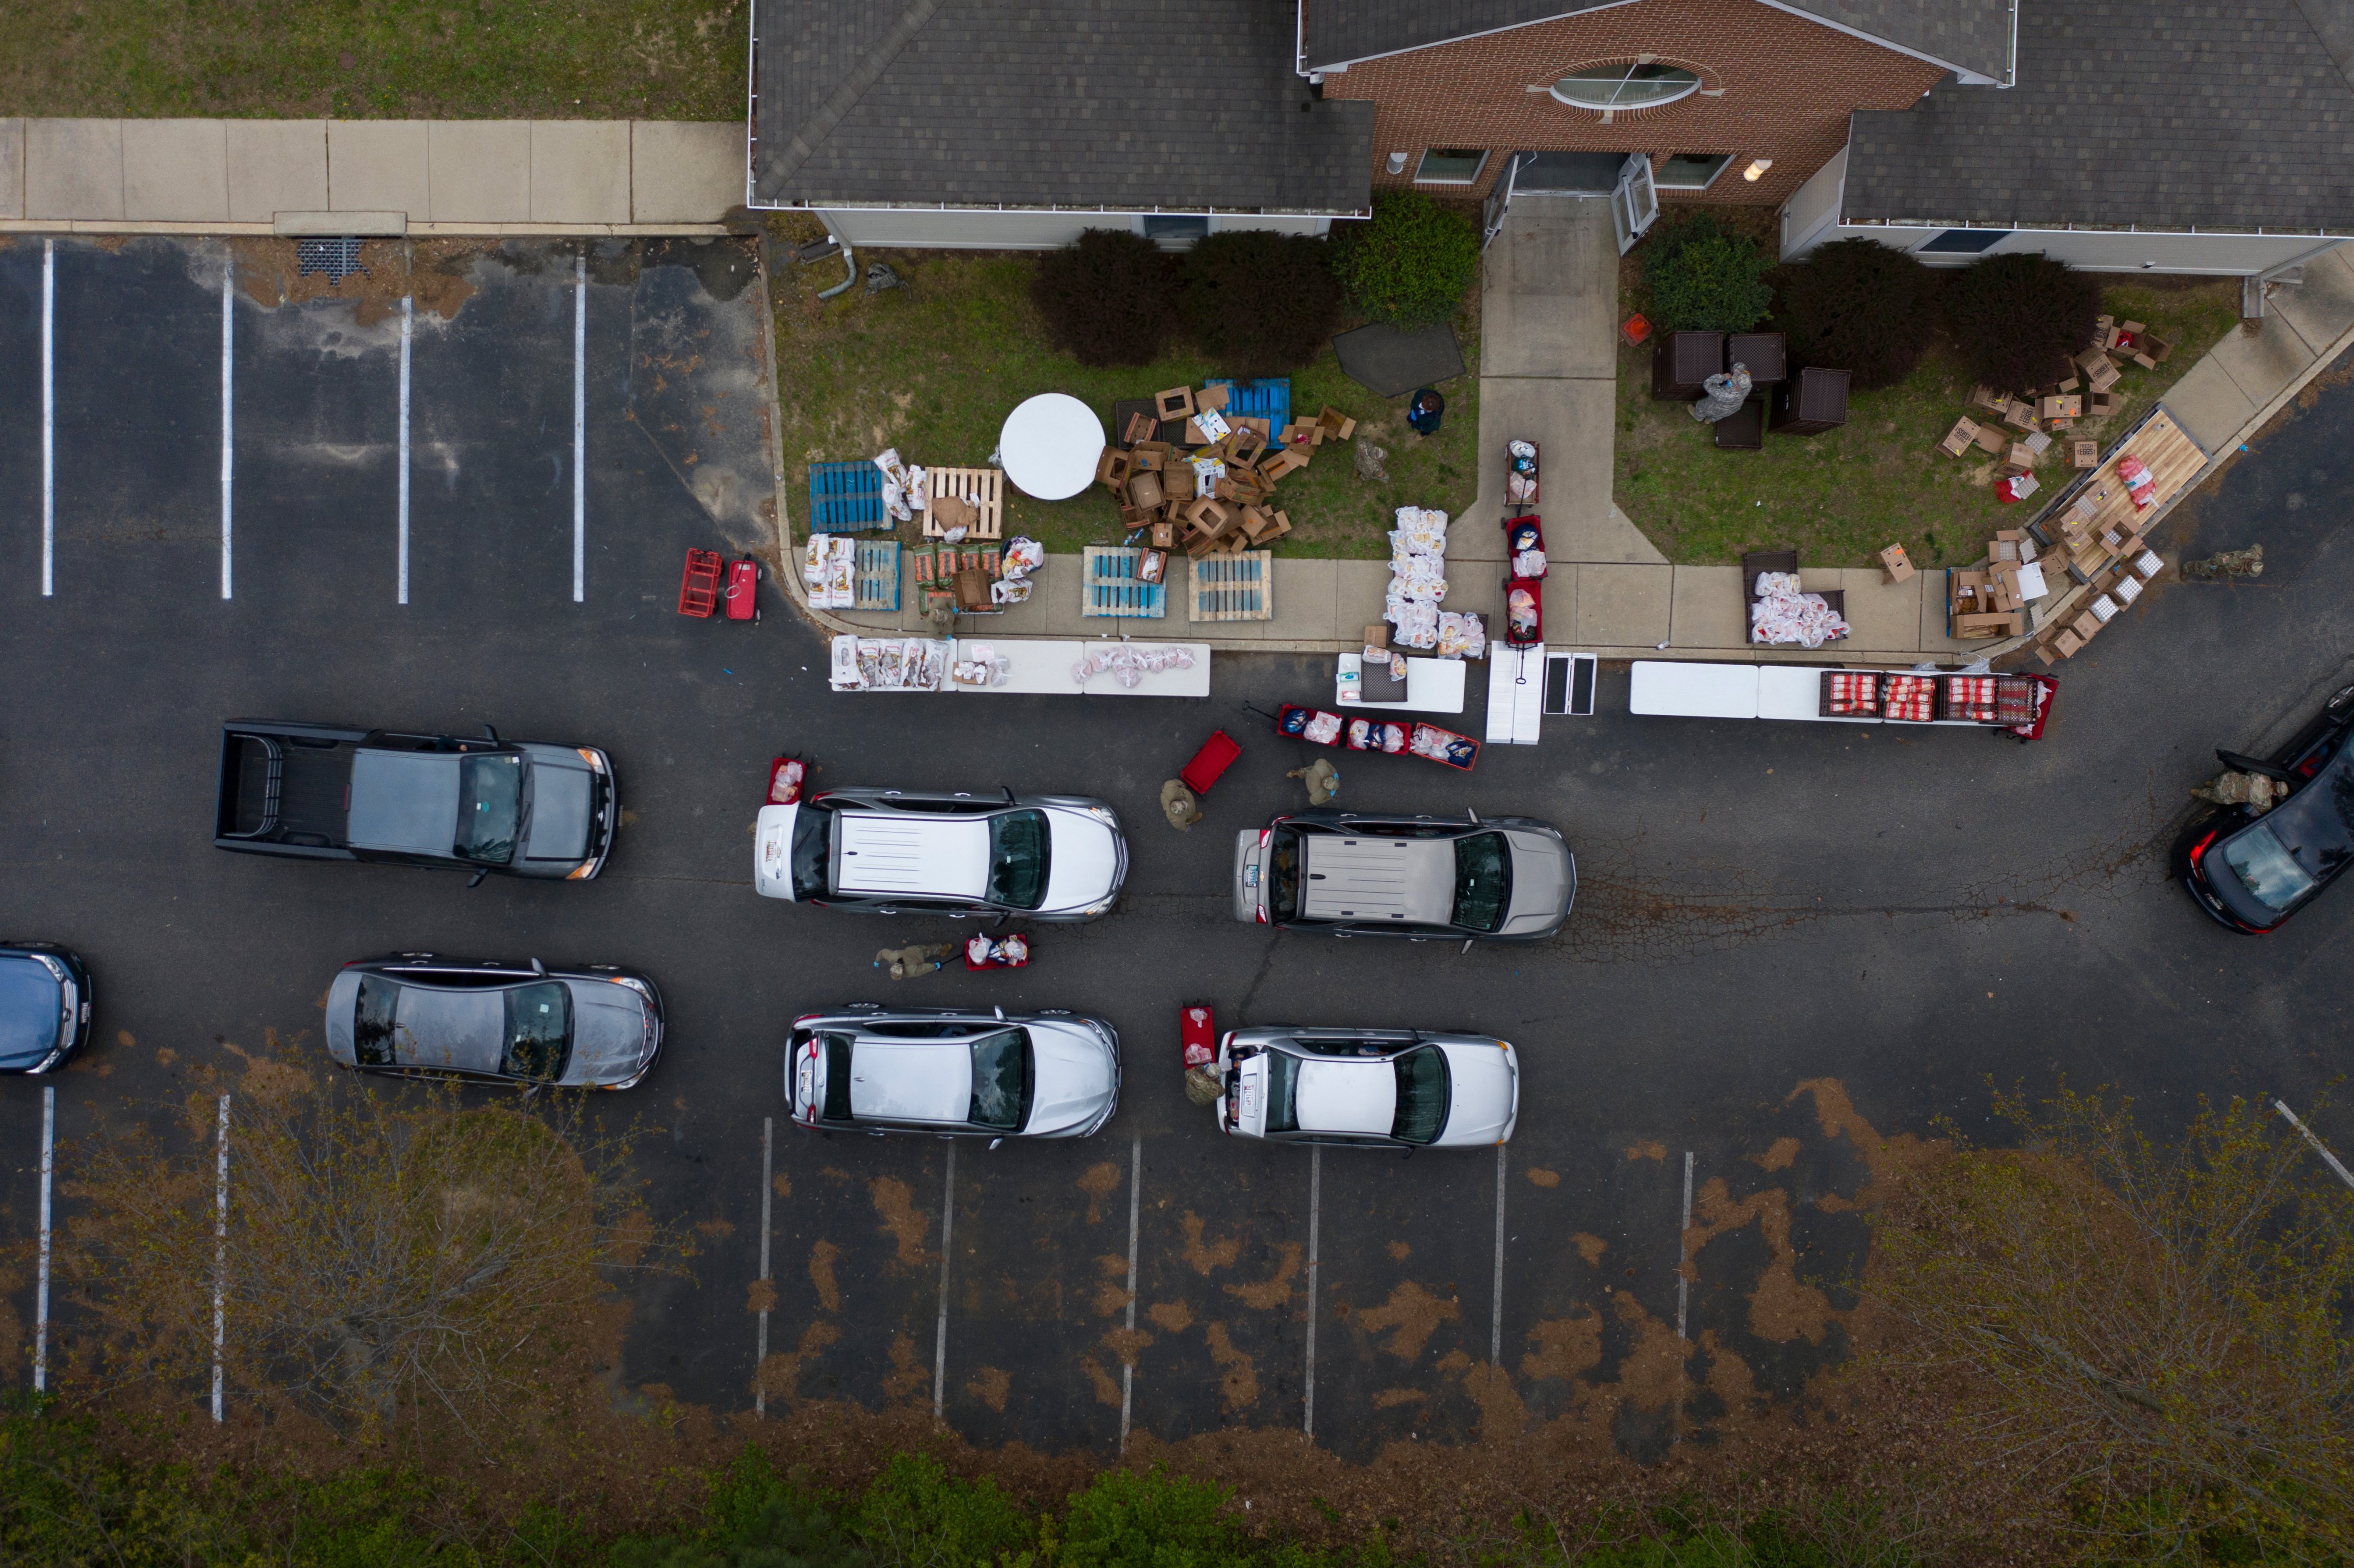 An aerial view of a food distribution site during the stay-at-home order in Centreville, Md., on April 17. (Peter van Agtmael—Magnum Photos for TIME)